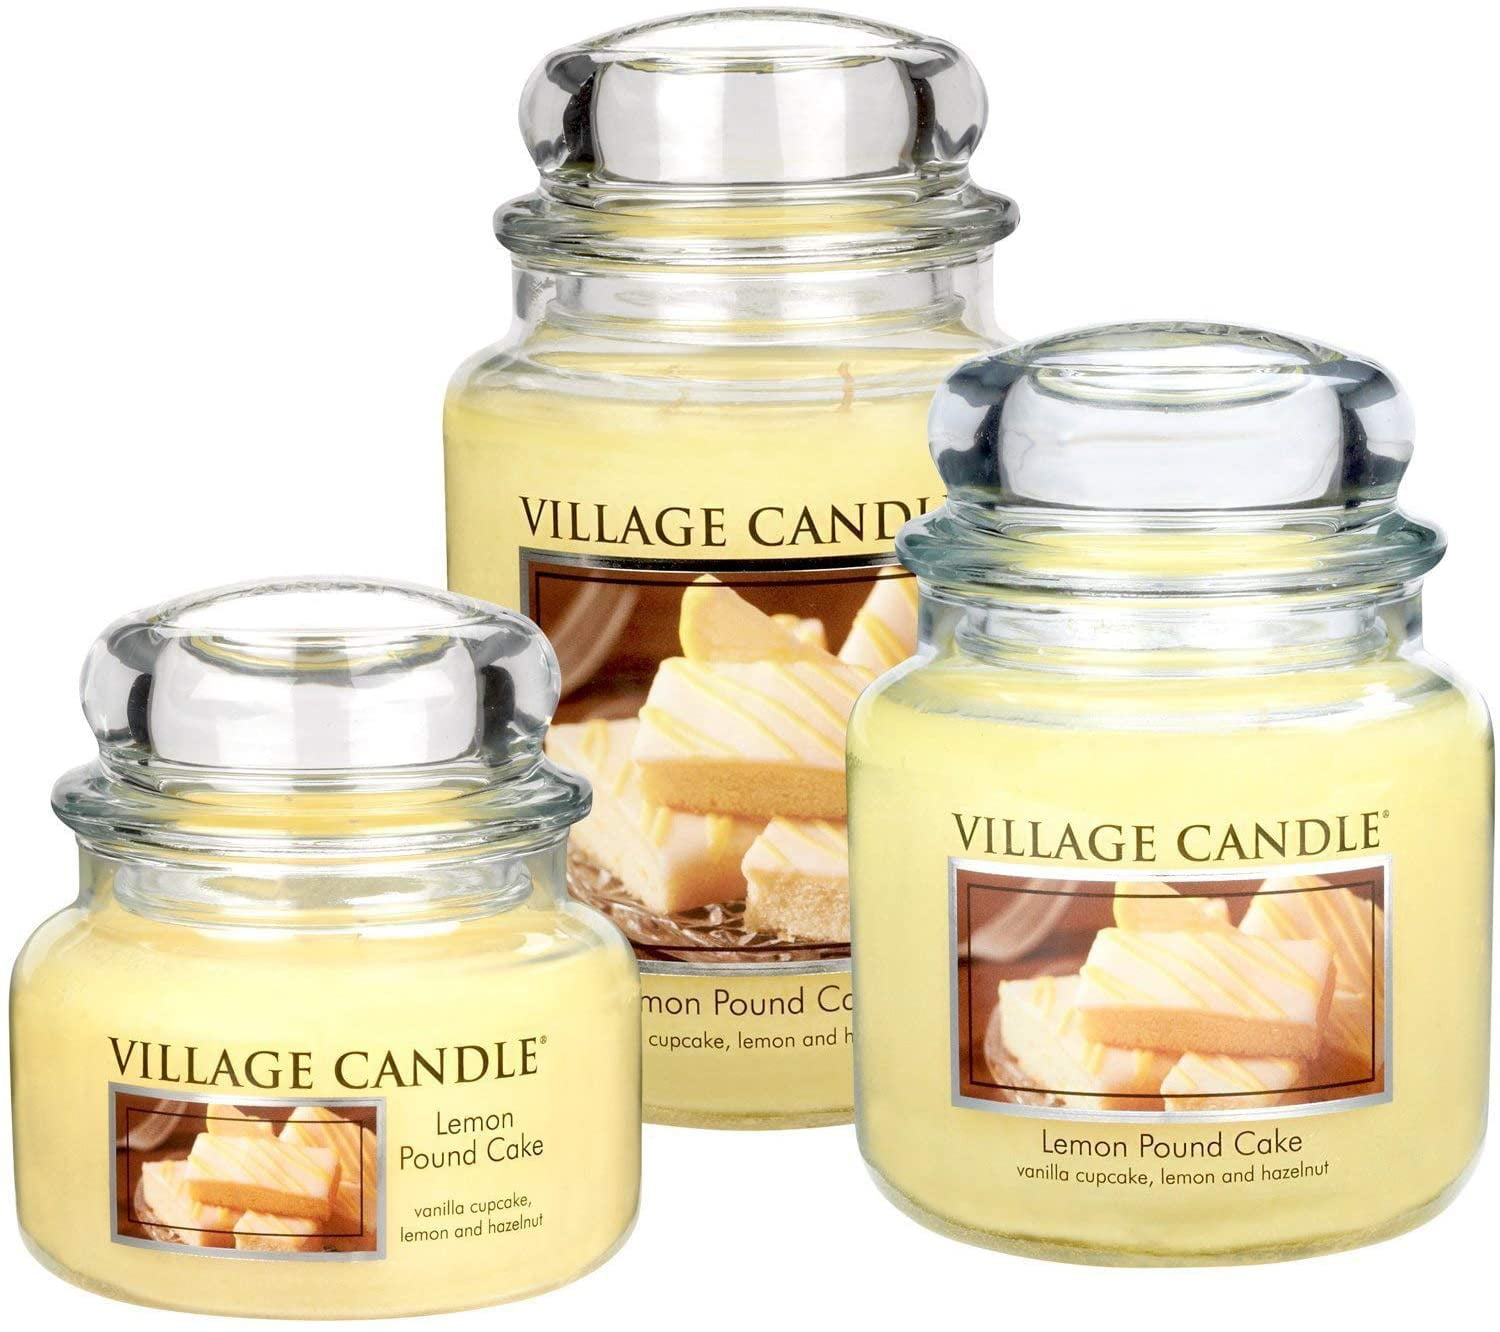 Village Candle Lemon Pound Cake 11 oz Glass Jar Scented Candle Small 106011388